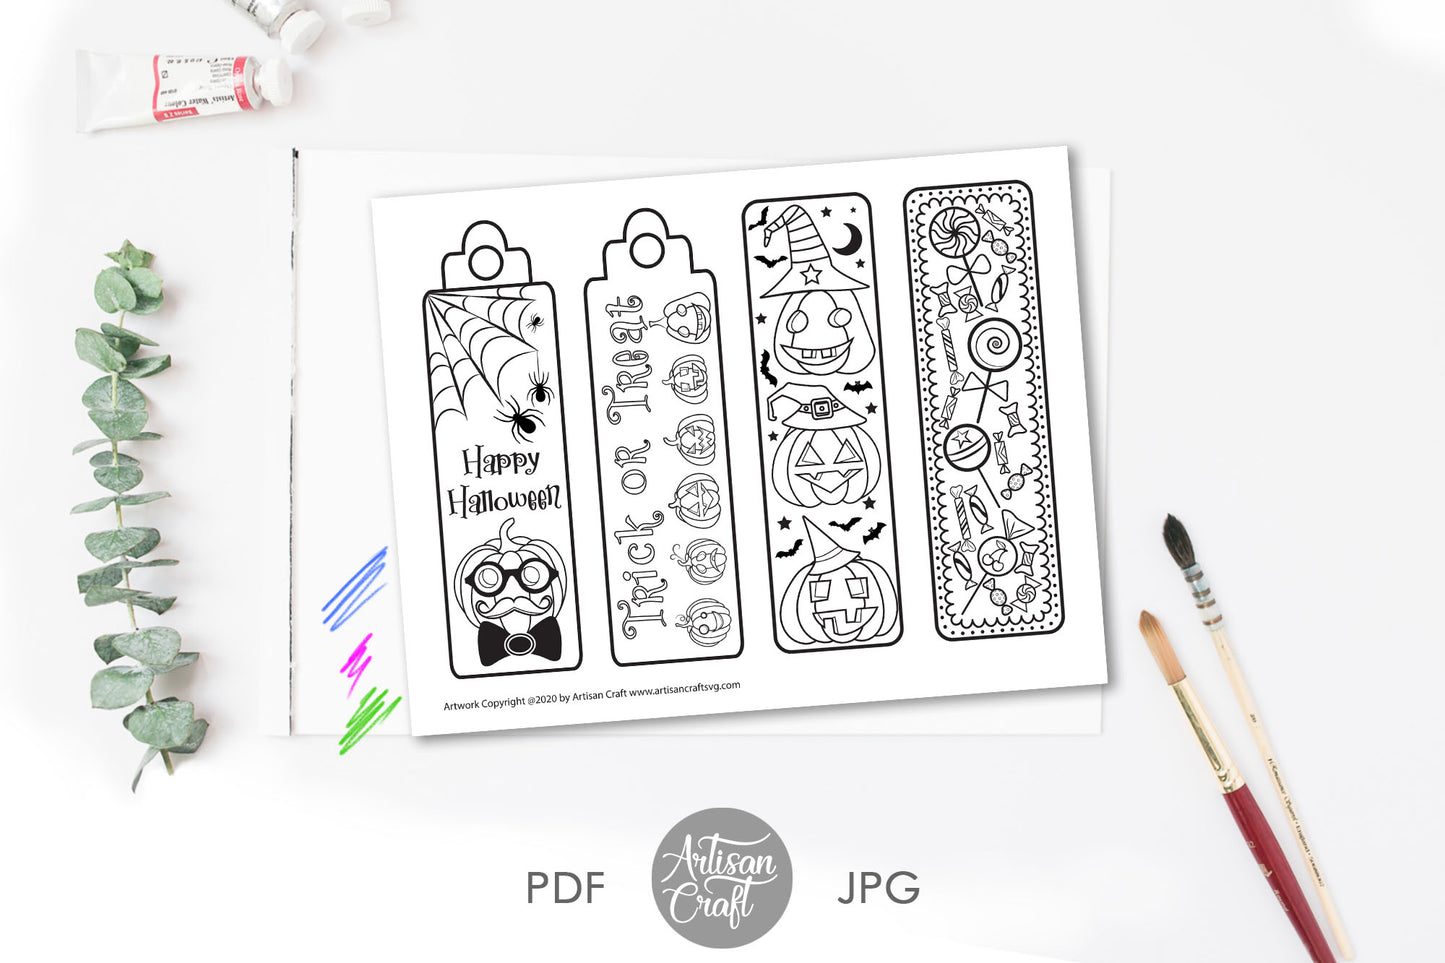 Halloween bookmark to color